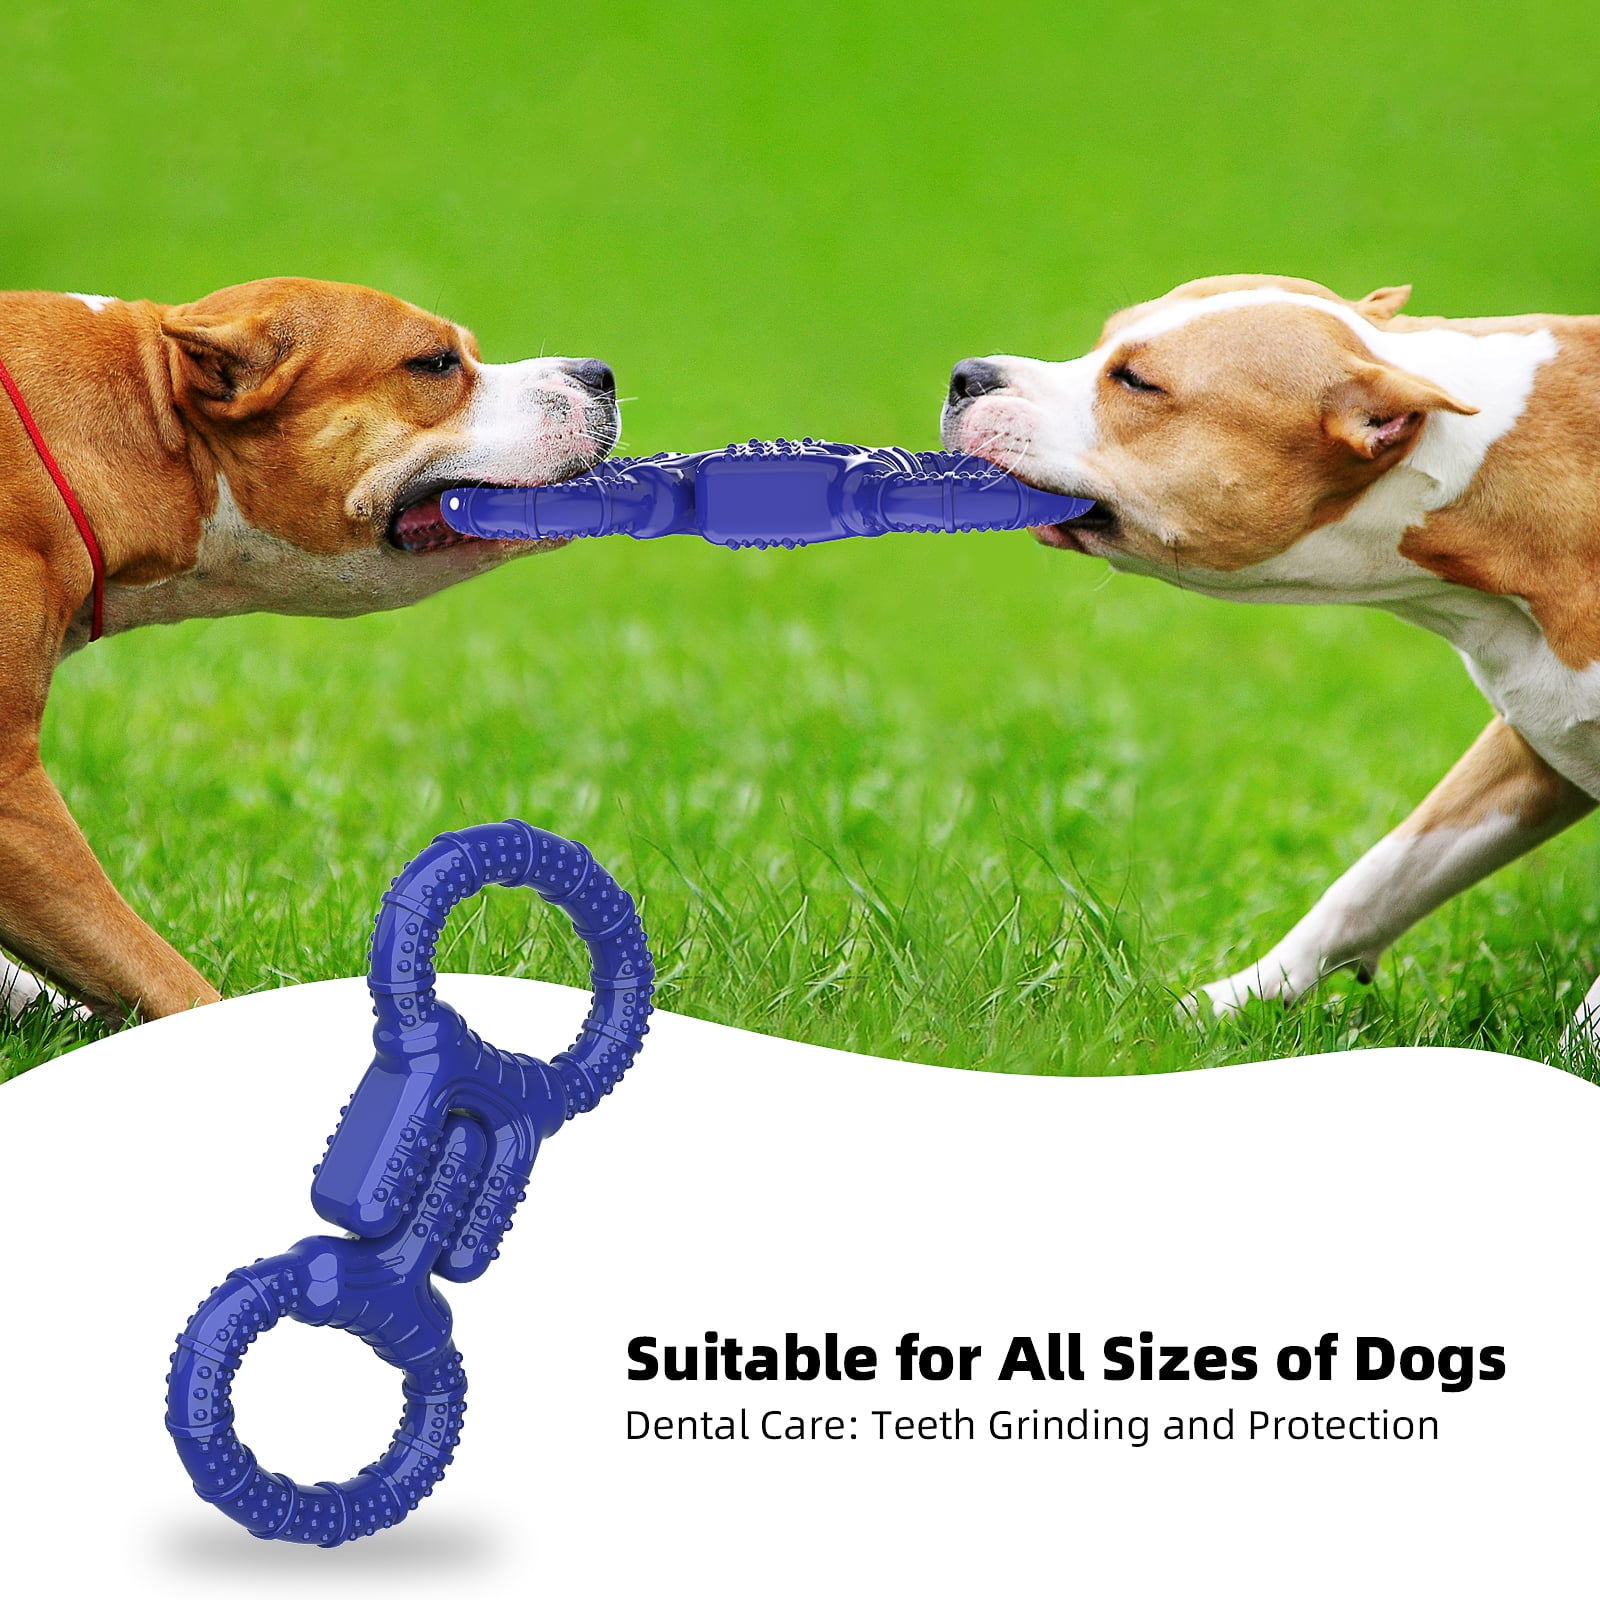 PcEoTllar Classic Dog Toy, Durable Natural Rubber for Aggressive Super –  PcEoTllar LED Pet Collar